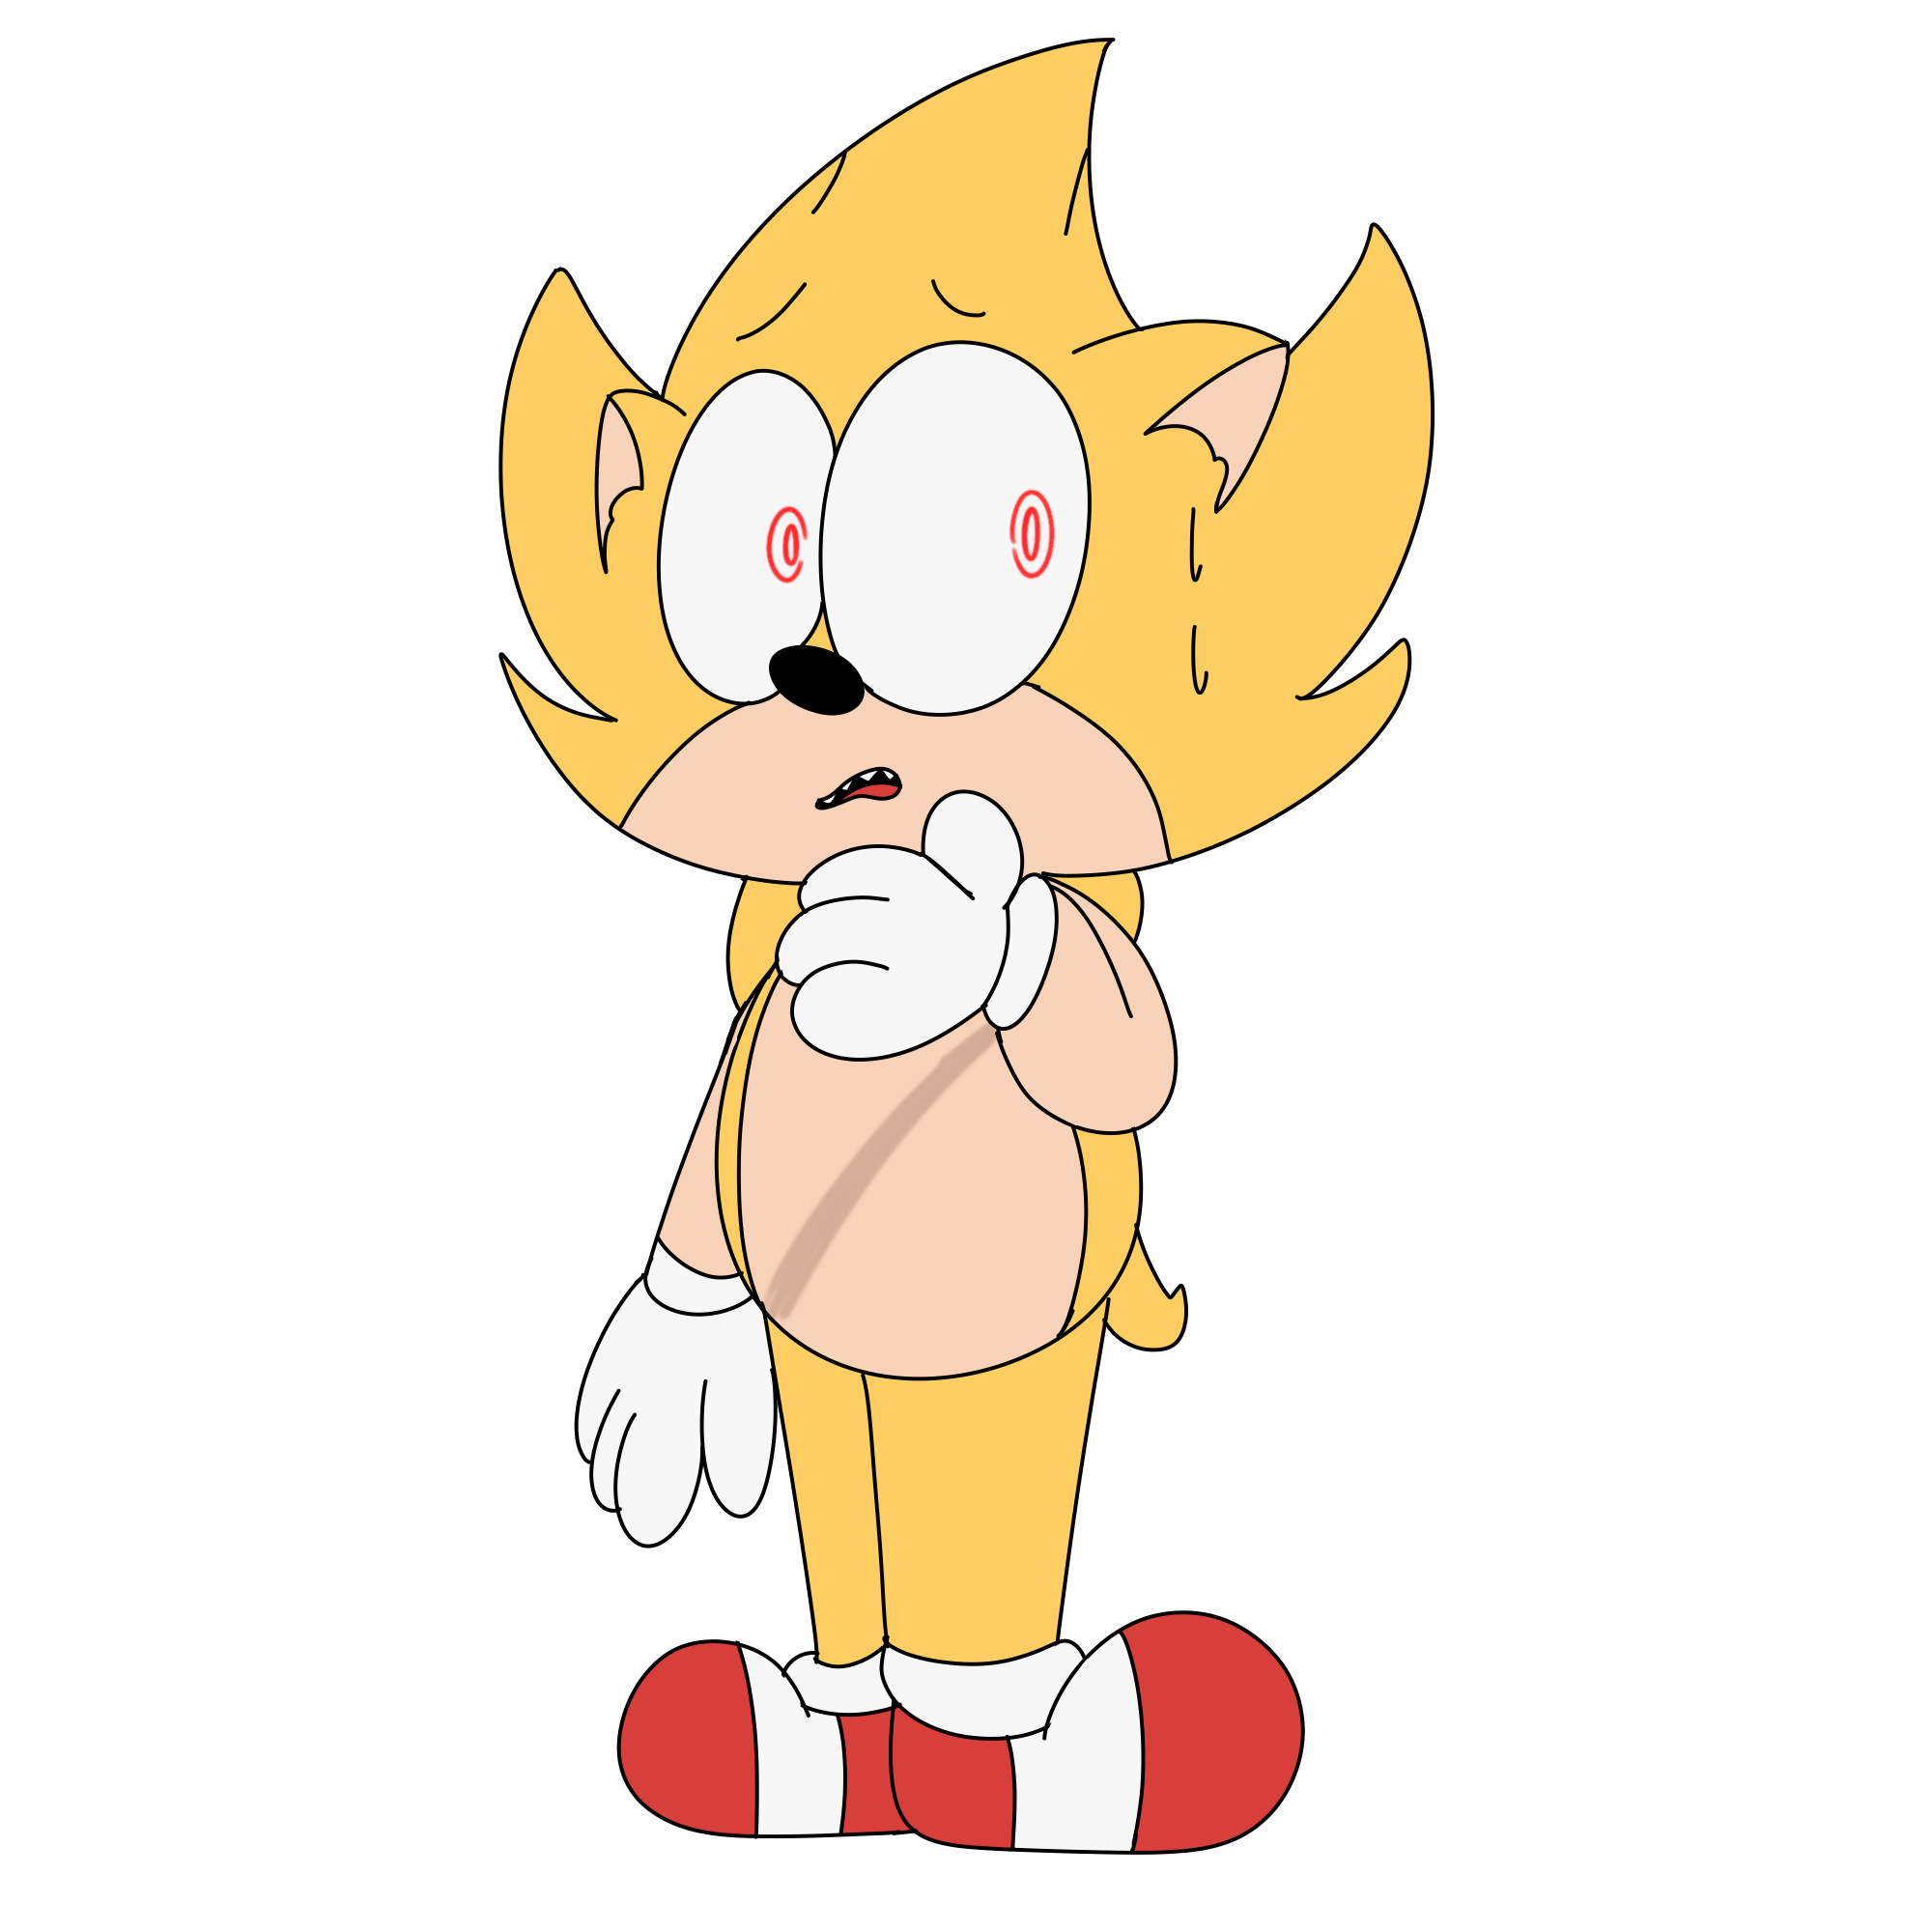 SHO. on X: Anyways uh did anyone else think Fleetway was gonna appear in  the movie or was that just me and a few friends #fleetway #fleetwaysonic  #fleetwaysupersonic #sonic #SonicMovie2 #SonicTheHedgehog2   /